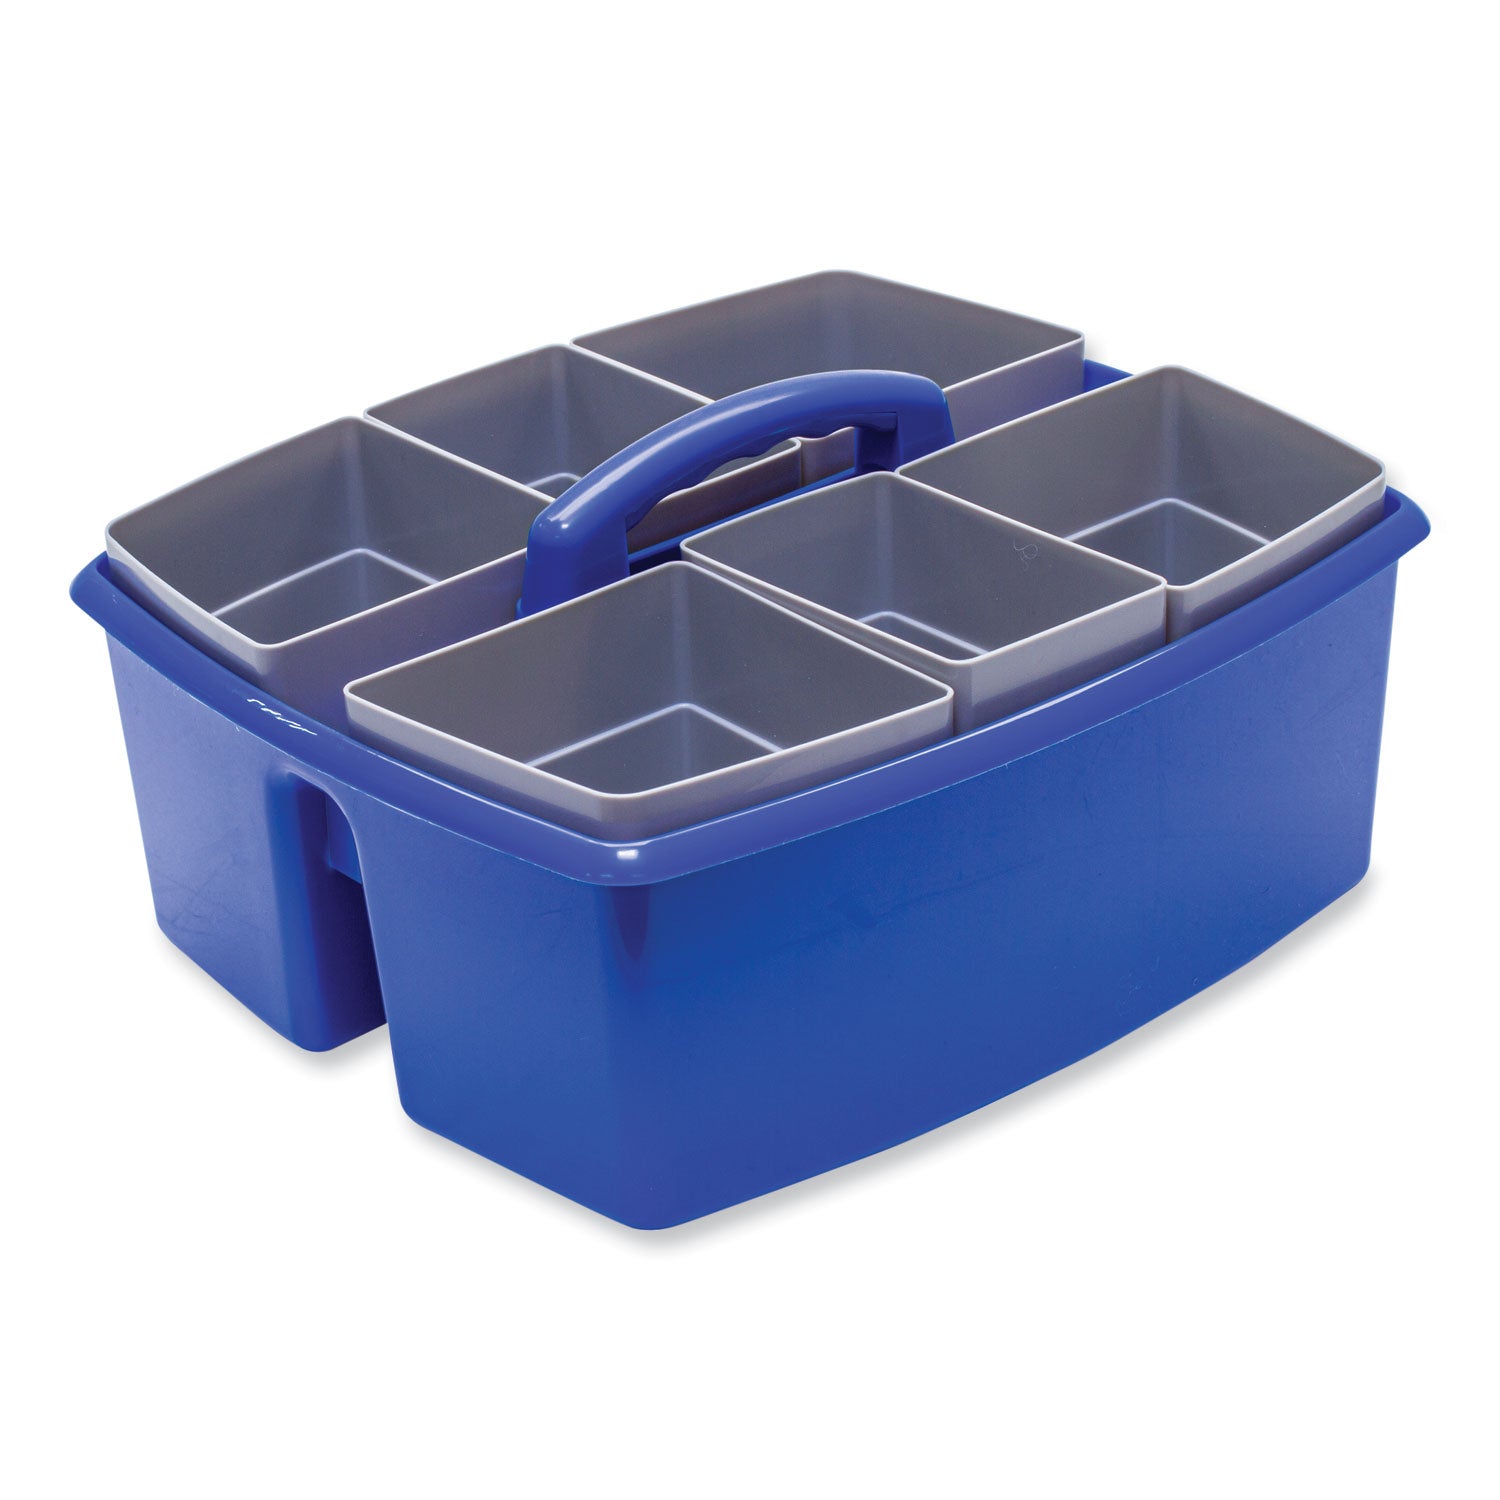 large-caddy-with-sorting-cups-blue-2-carton_stx00985u02c - 1